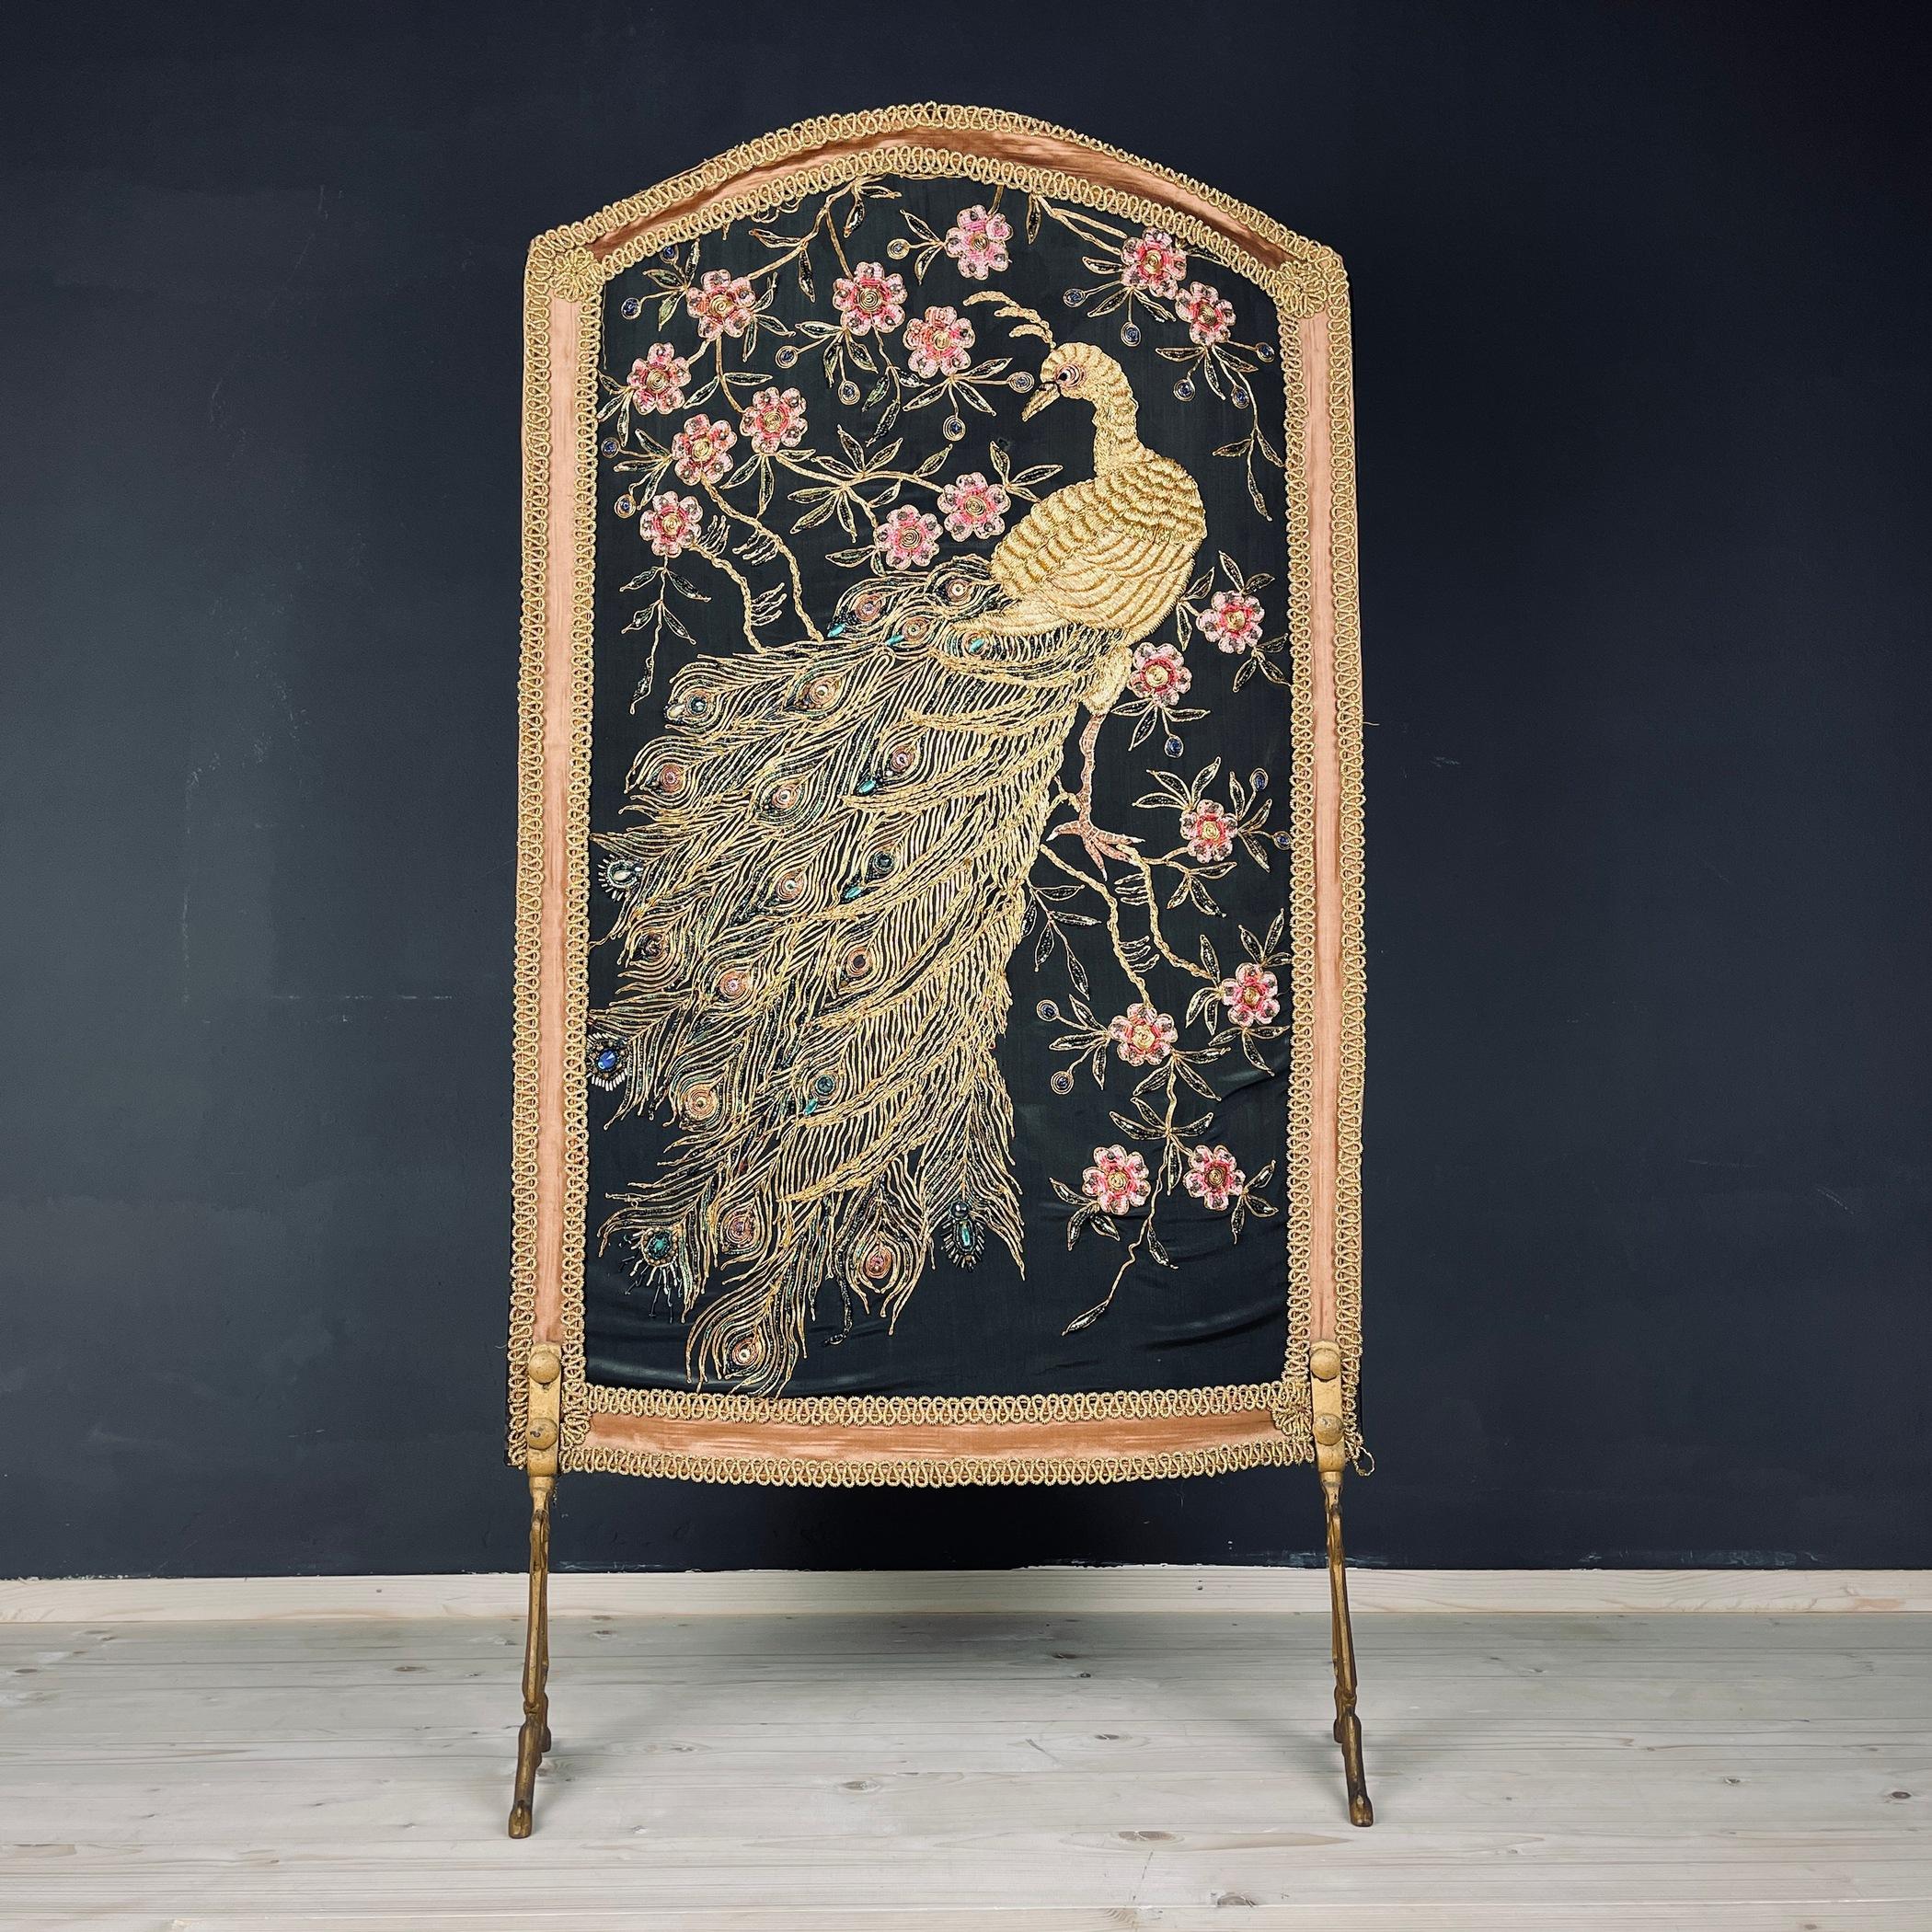 Rare vintage fireplace screen made in Italy in the 30s and 40s. A fire screen is a flat, movable piece of furniture placed in front of a fireplace to dampen heat or excessive light caused by a flame. The fireplace screen rests on two bronze feet.